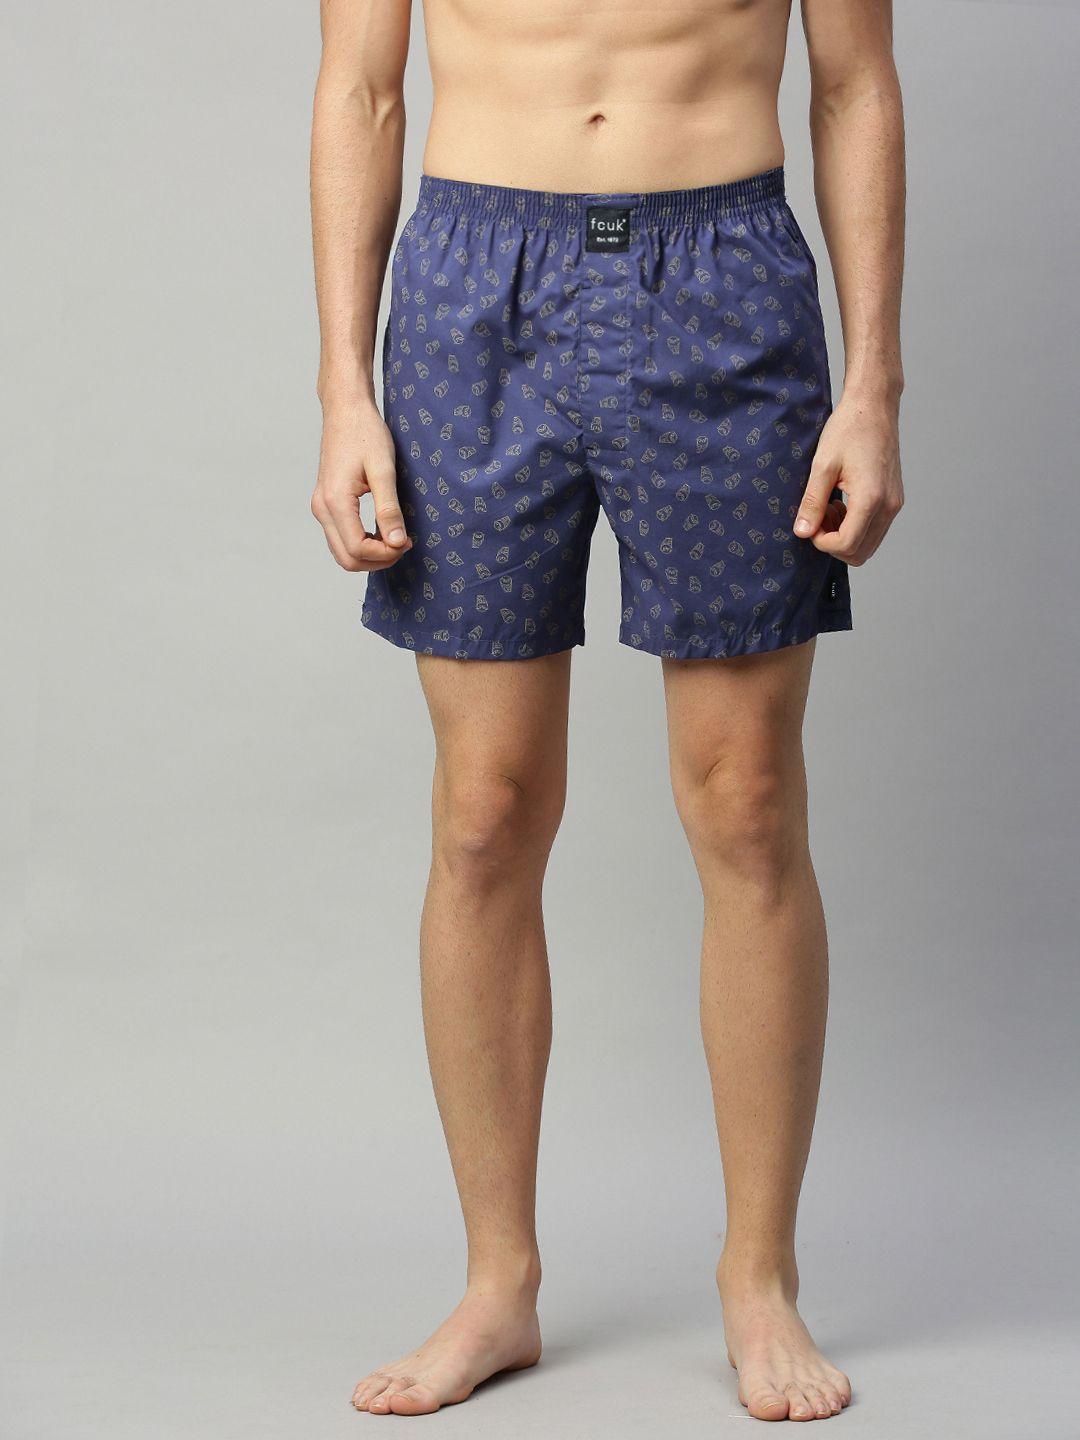 fcuk men's navy blue and beige printed pure cotton boxers